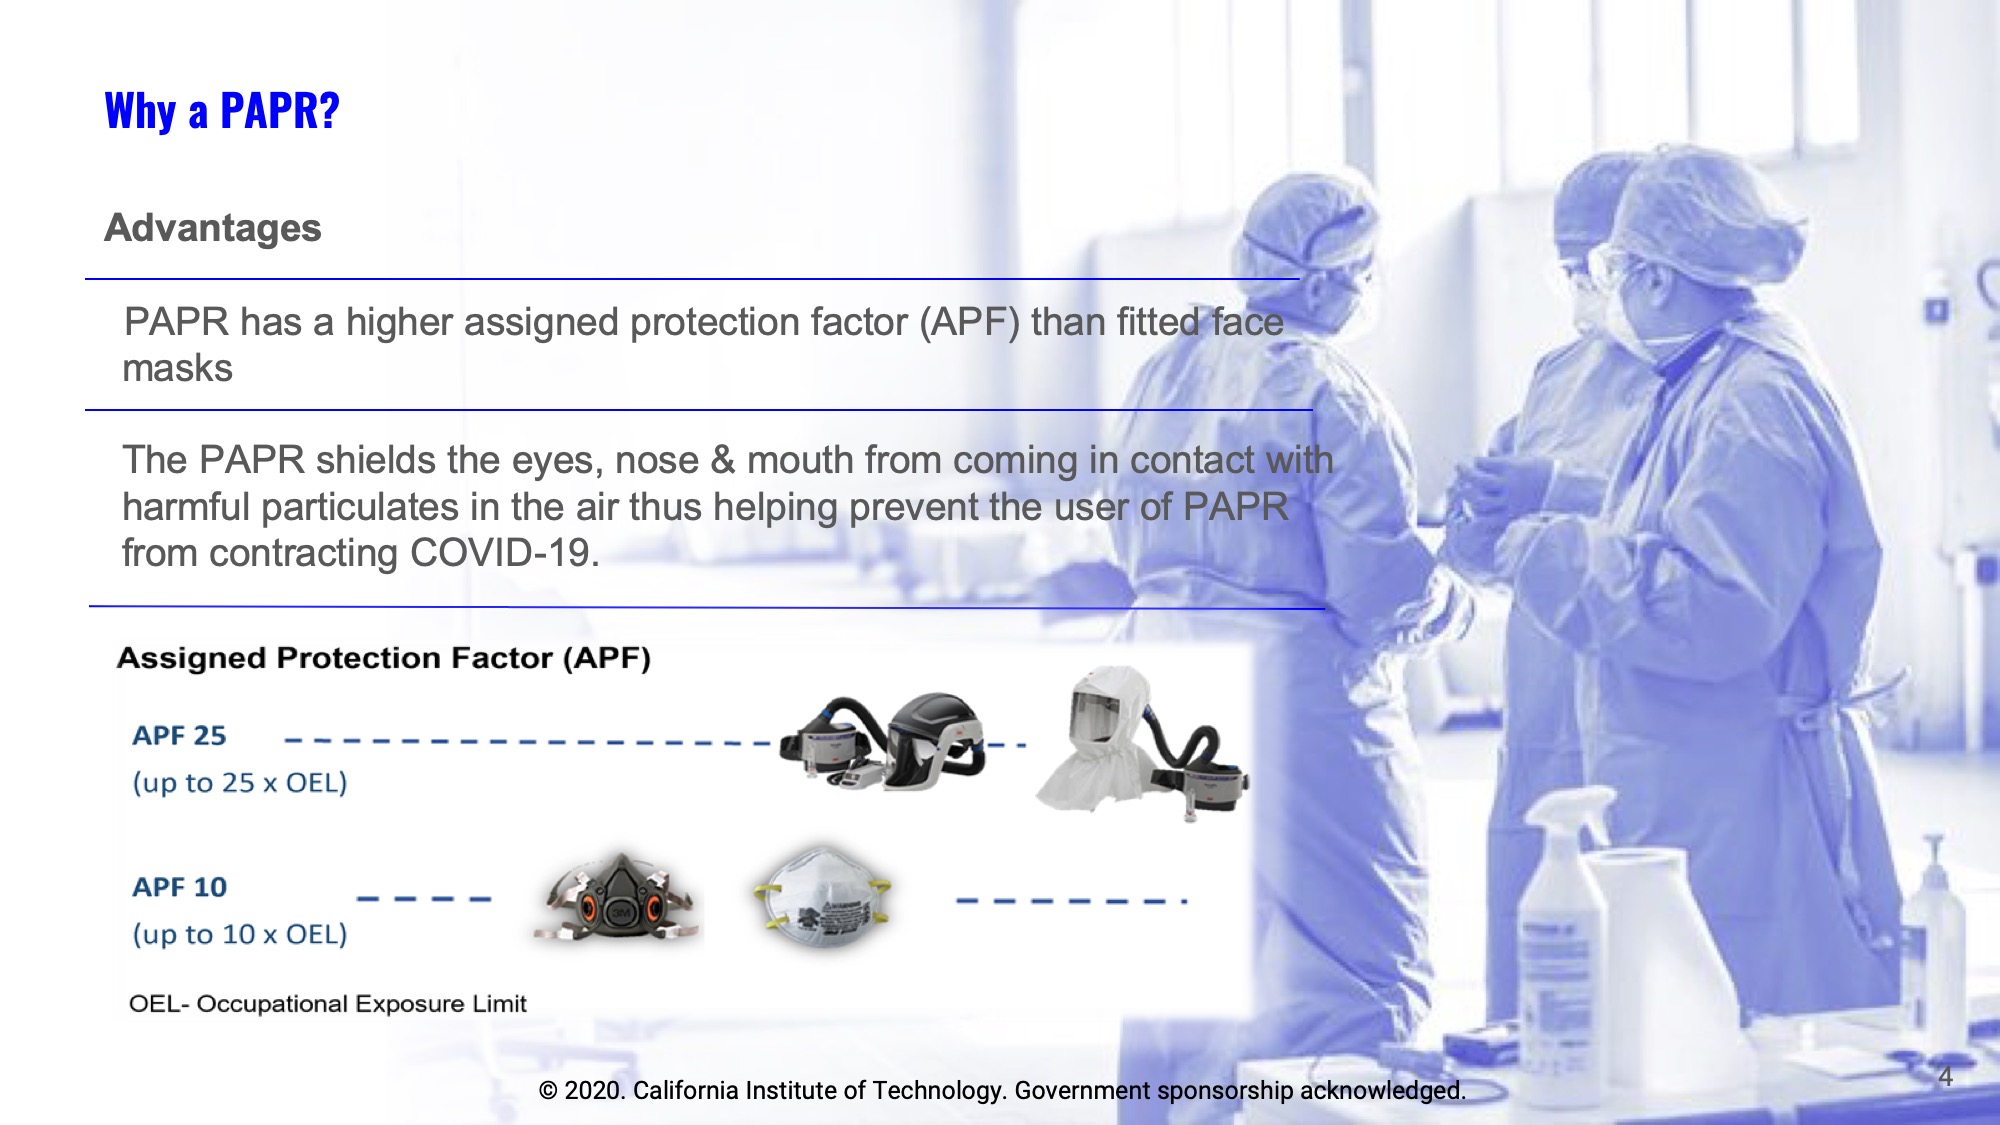 Slide 4: Why a PAPR? Advantages: PAPR has a higher assigned protection factor (APF) than fitted face masks. The PAPR shields the eyes, nose & mouth from coming in contact with harmful particulates in the air thus helping prevent the user of PAPR from contracting COVID-19. Image shows Assigned Protection Factor (APF)